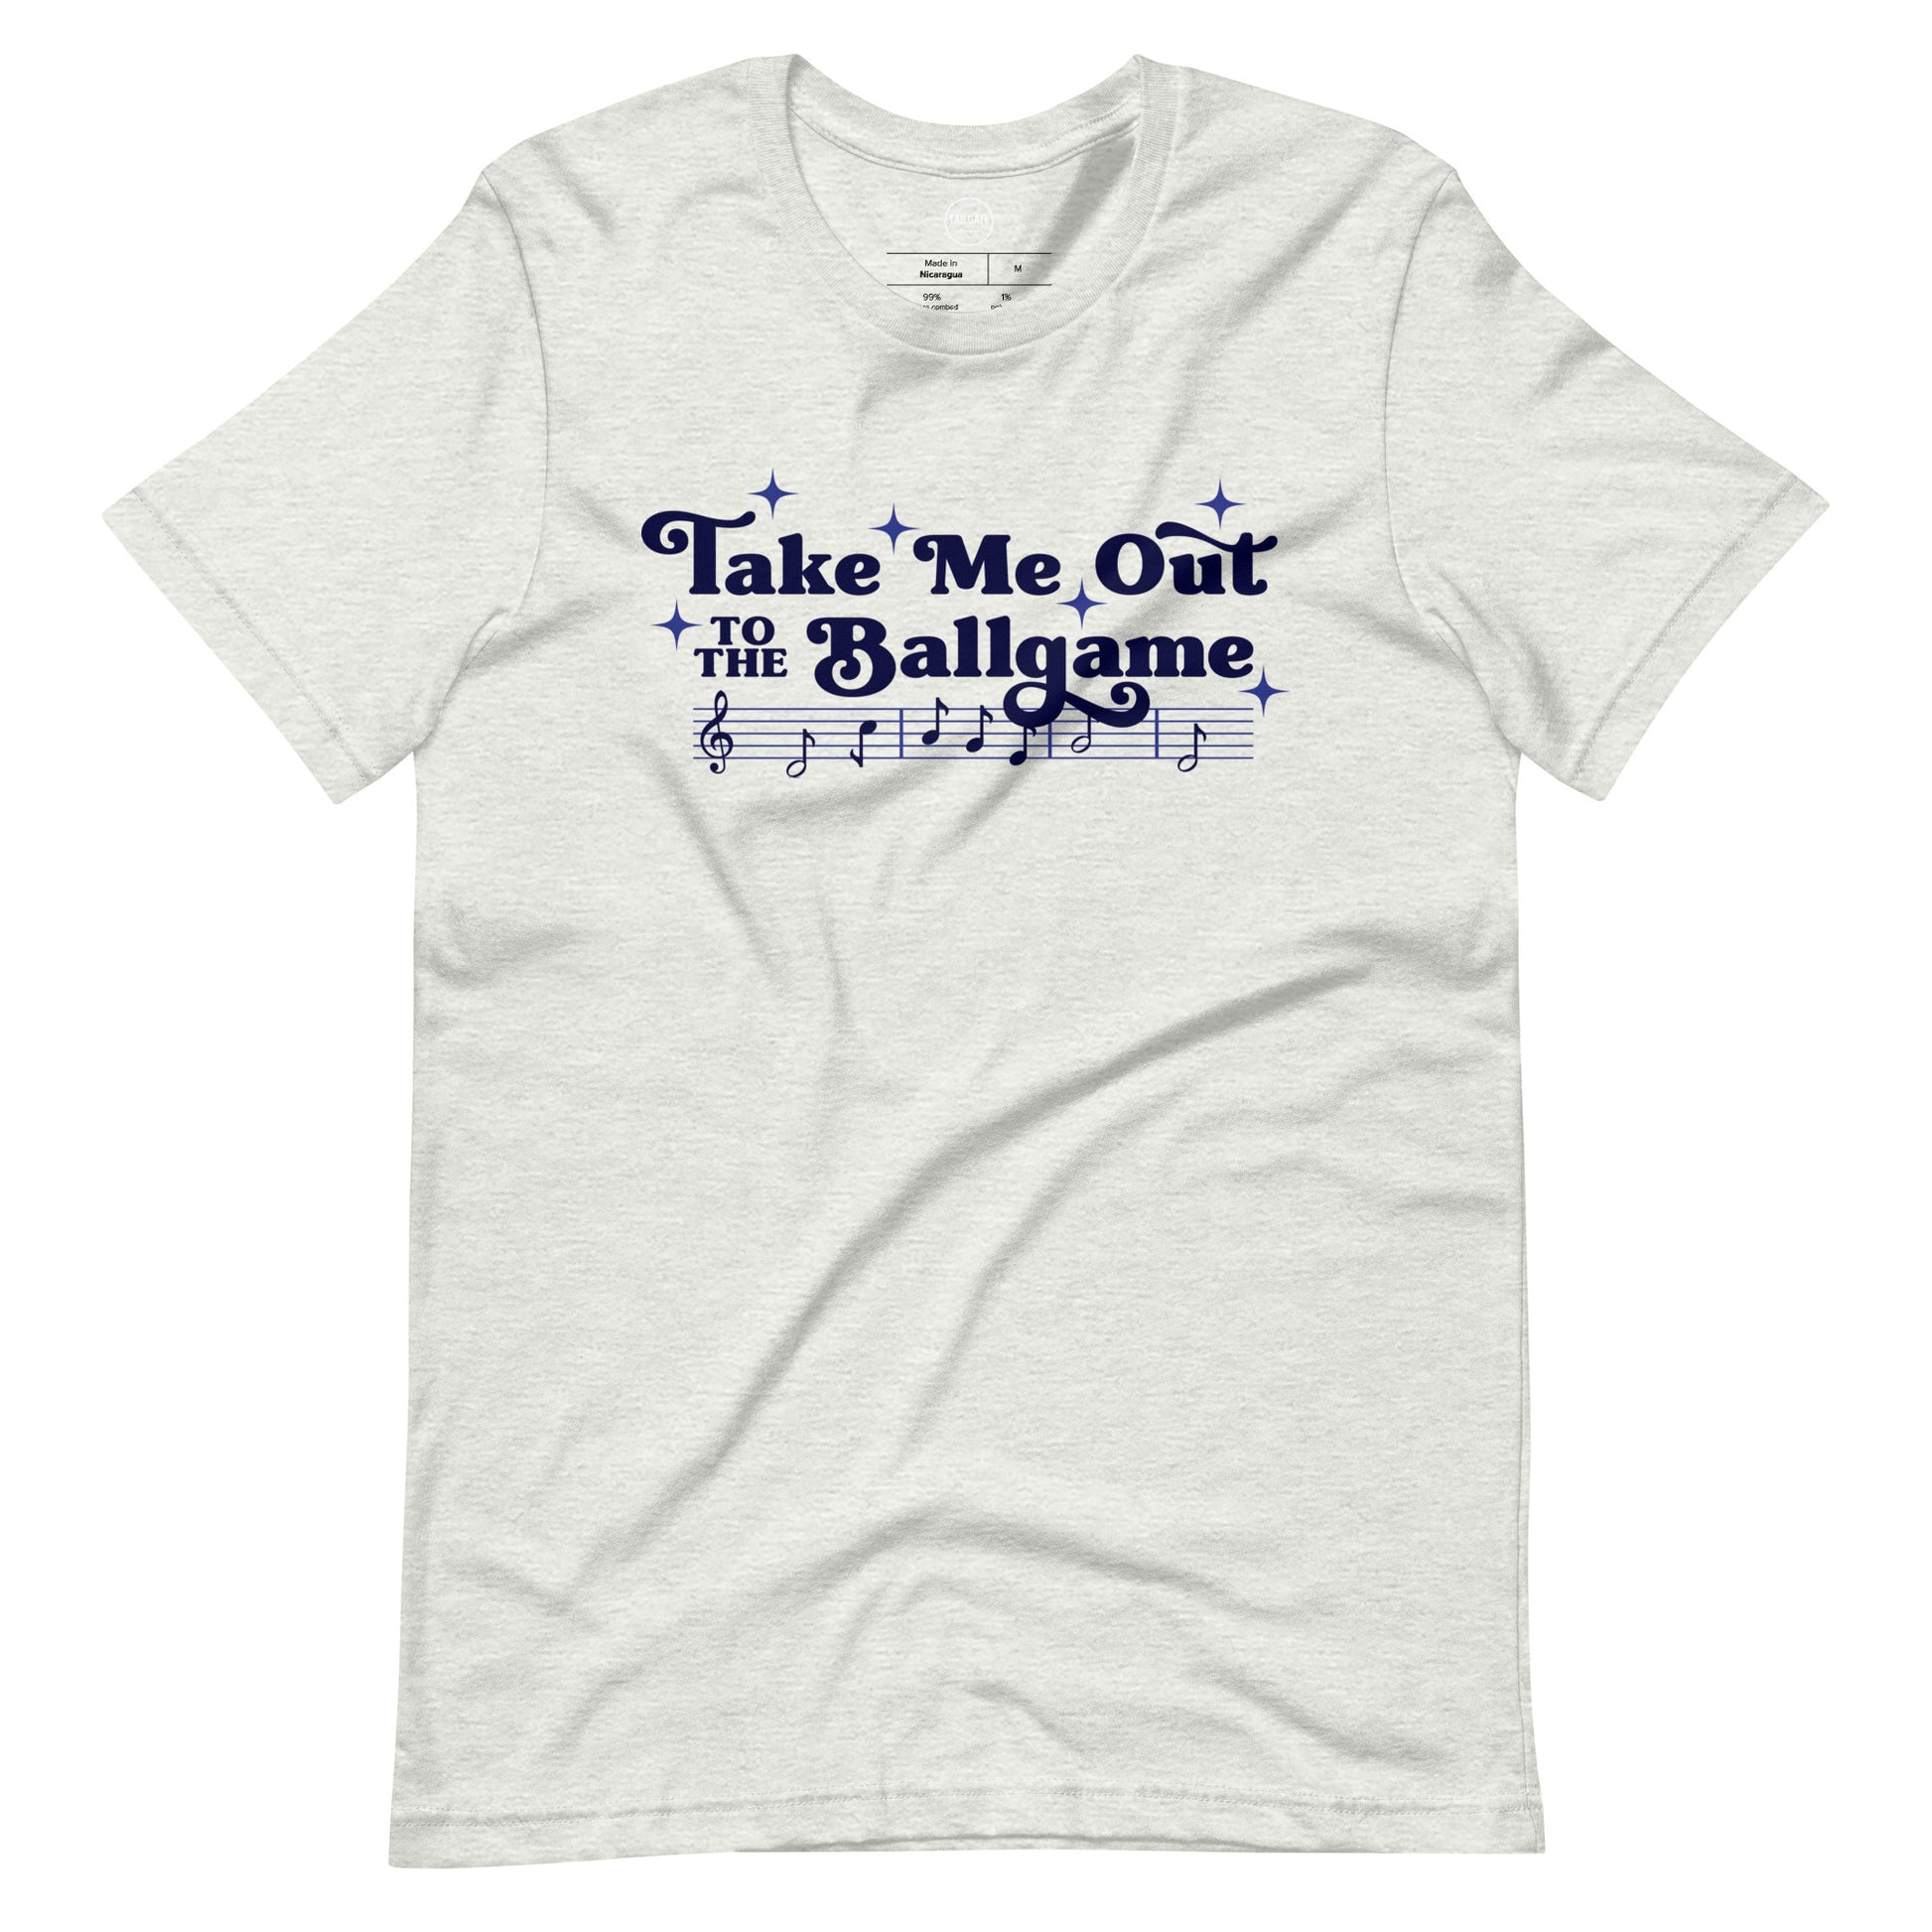 Image of heather ash t-shirt with design of "Take Me Out to the Ballgame" with coordinating musical notes in navy located on centre chest. This design is exclusive to Tailgate Mercantile and available only online.